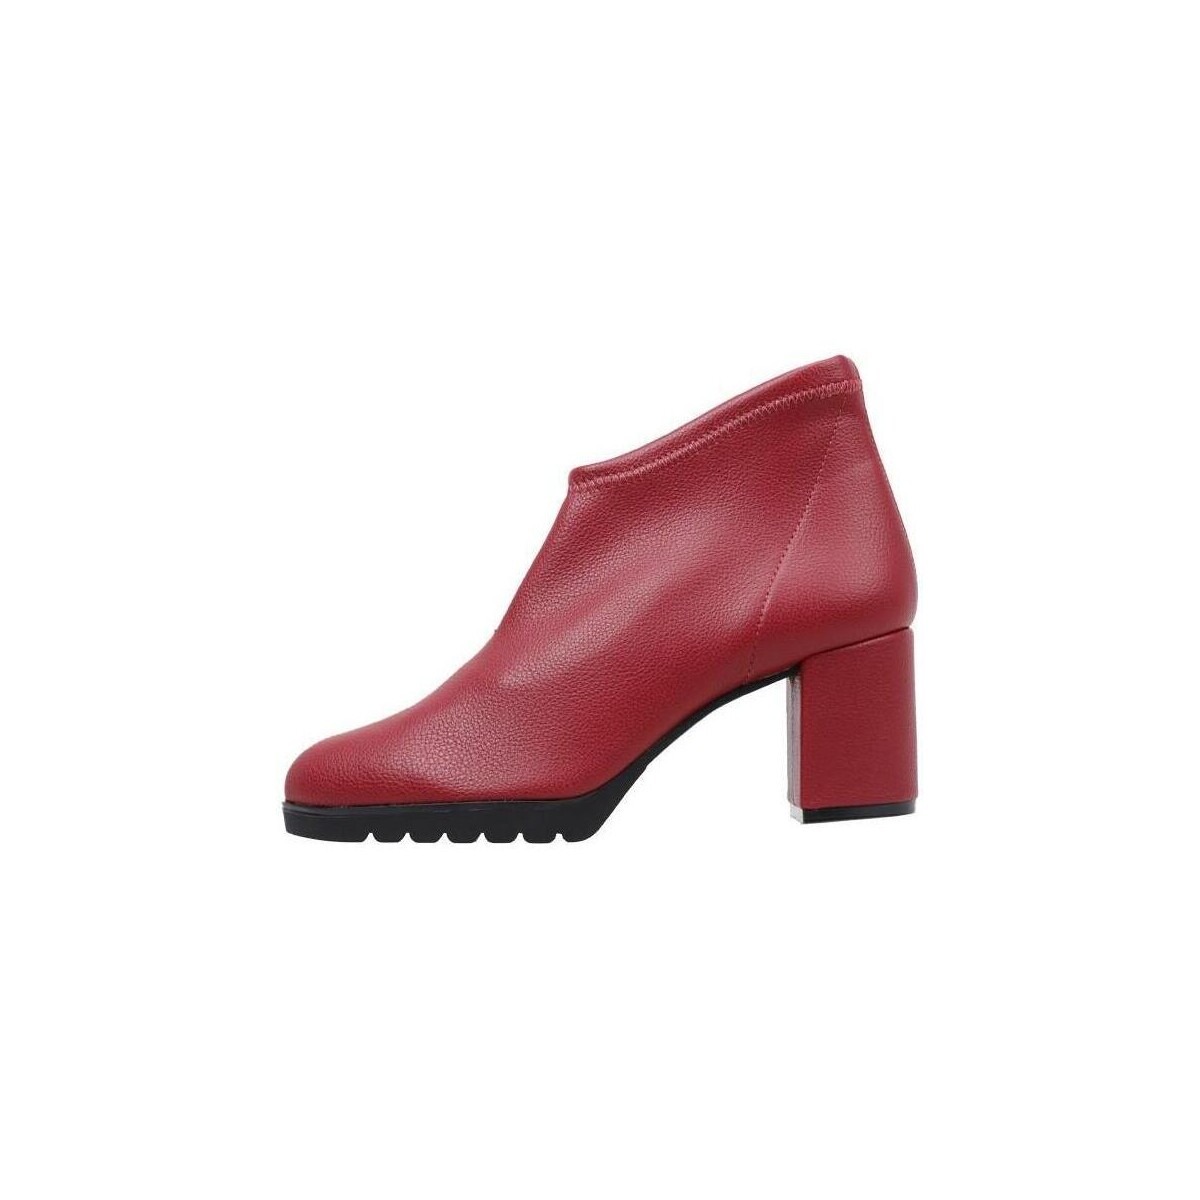 Sandra Fontan Ankle Boots in Red for Woman from Spartoo GOOFASH